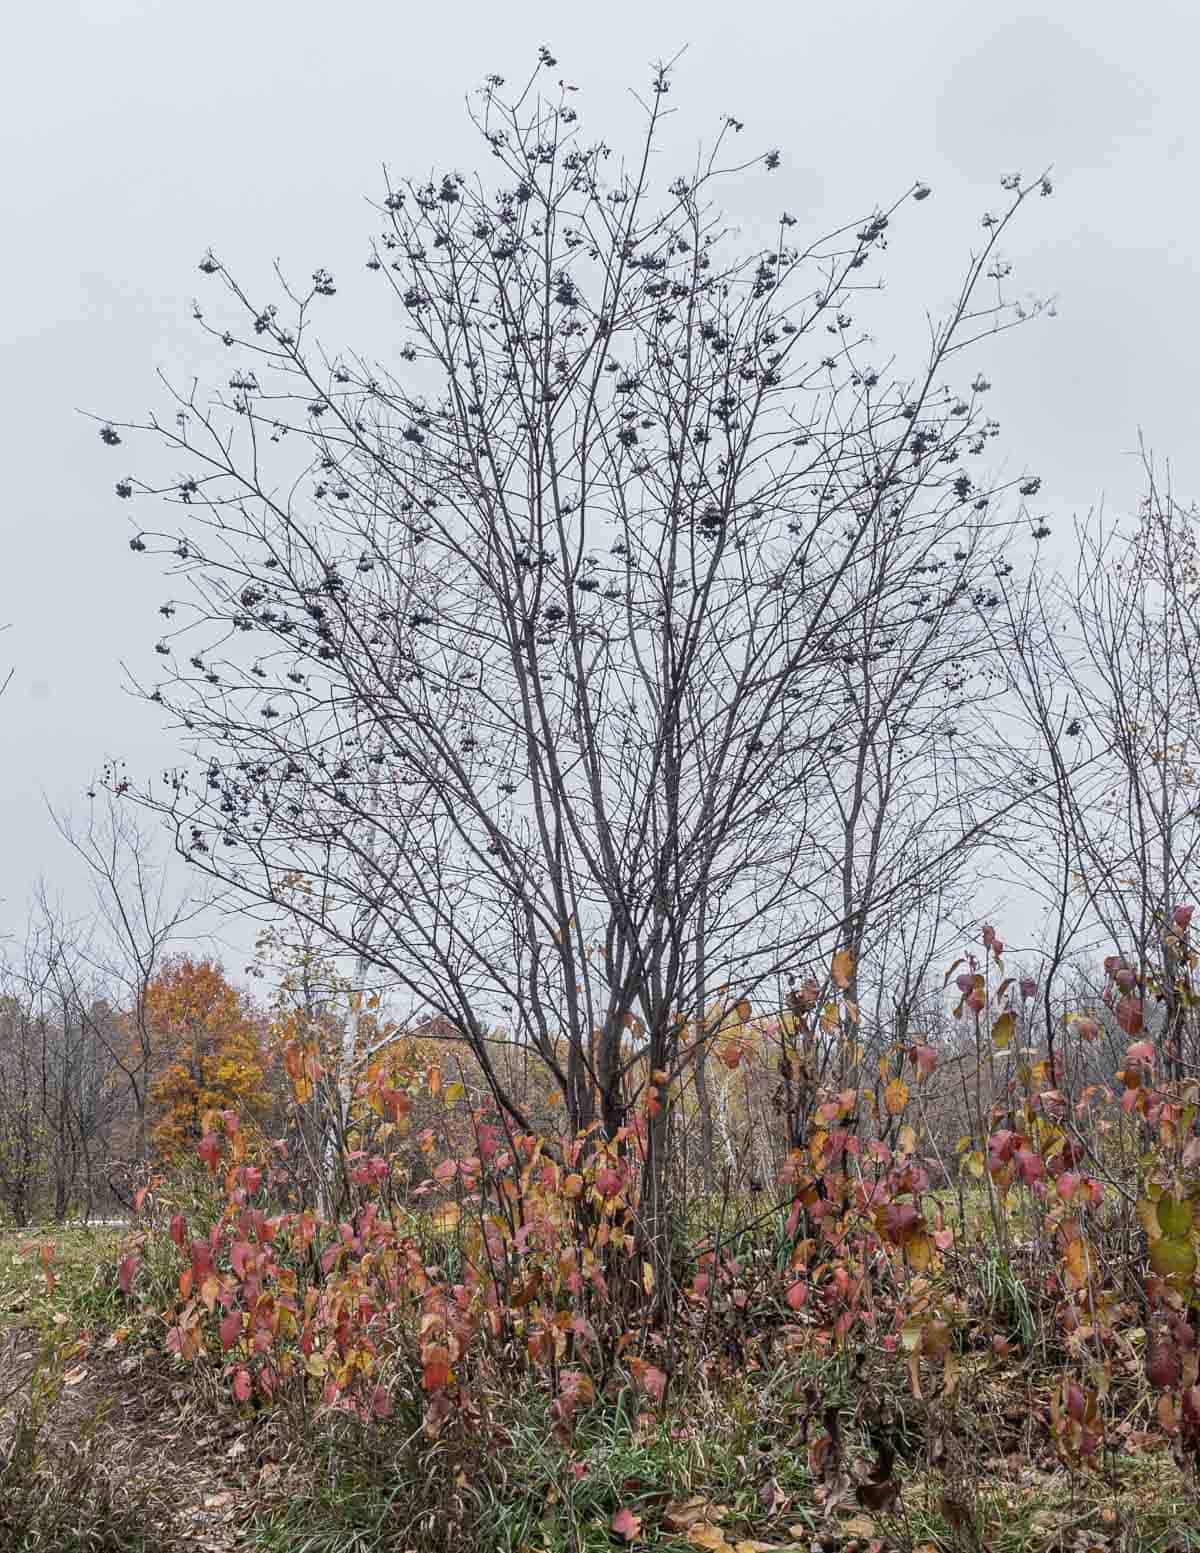 A nannyberry tree (Viburnum lentago) showing fruit on the branches in winter. 